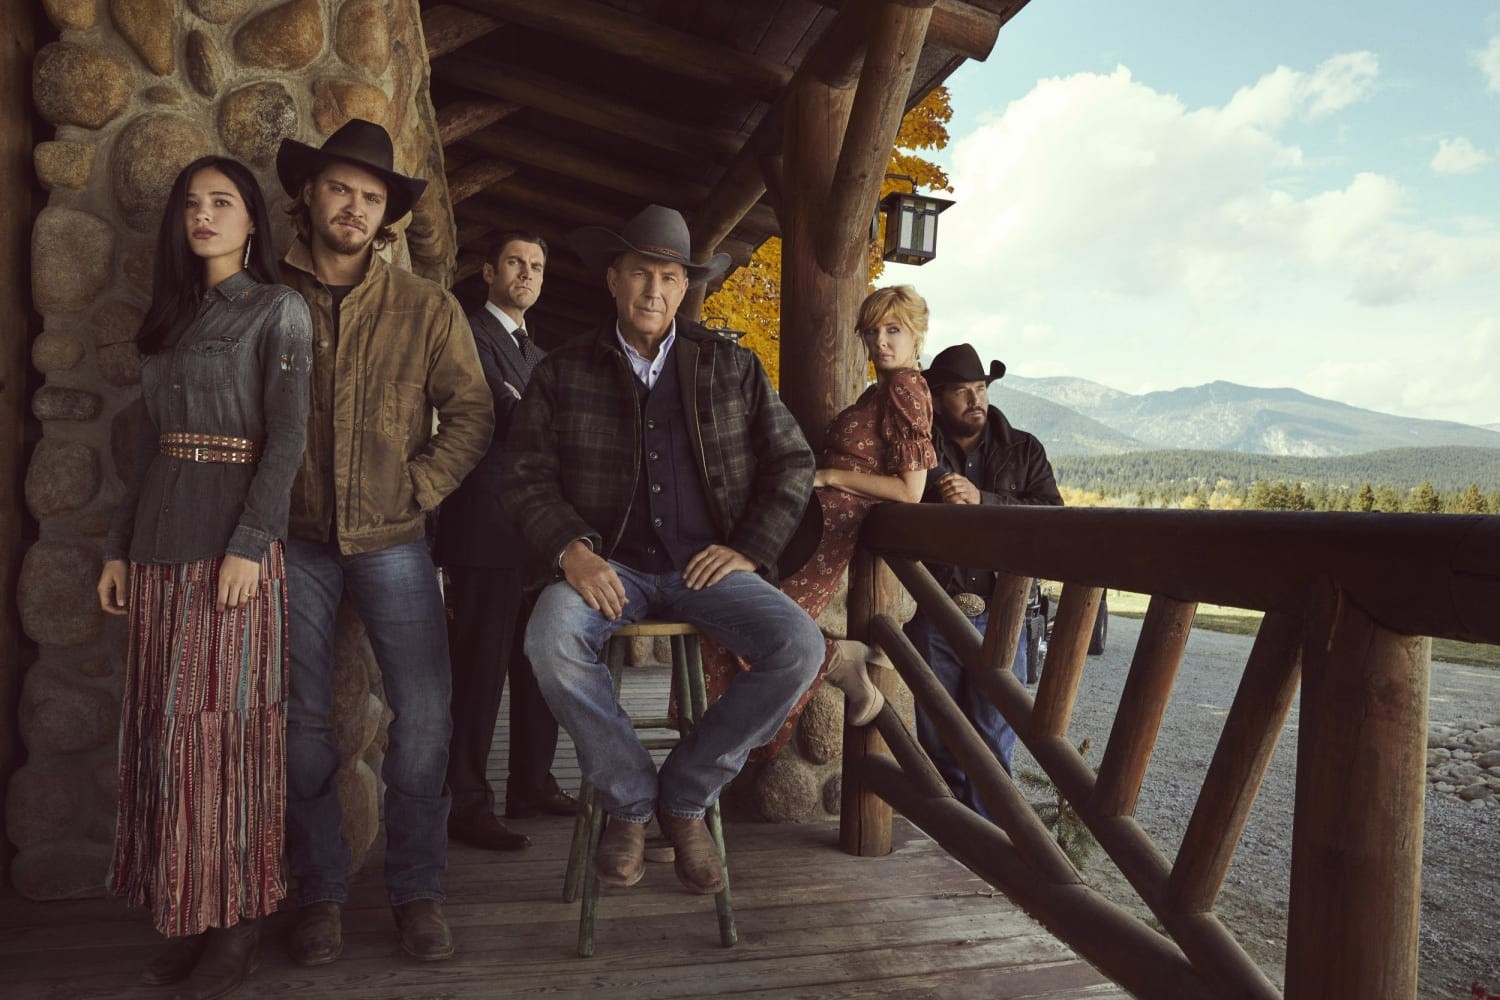 Yellowstone co-stars reportedly did not take Kevin Costner's 'betrayal' lightly